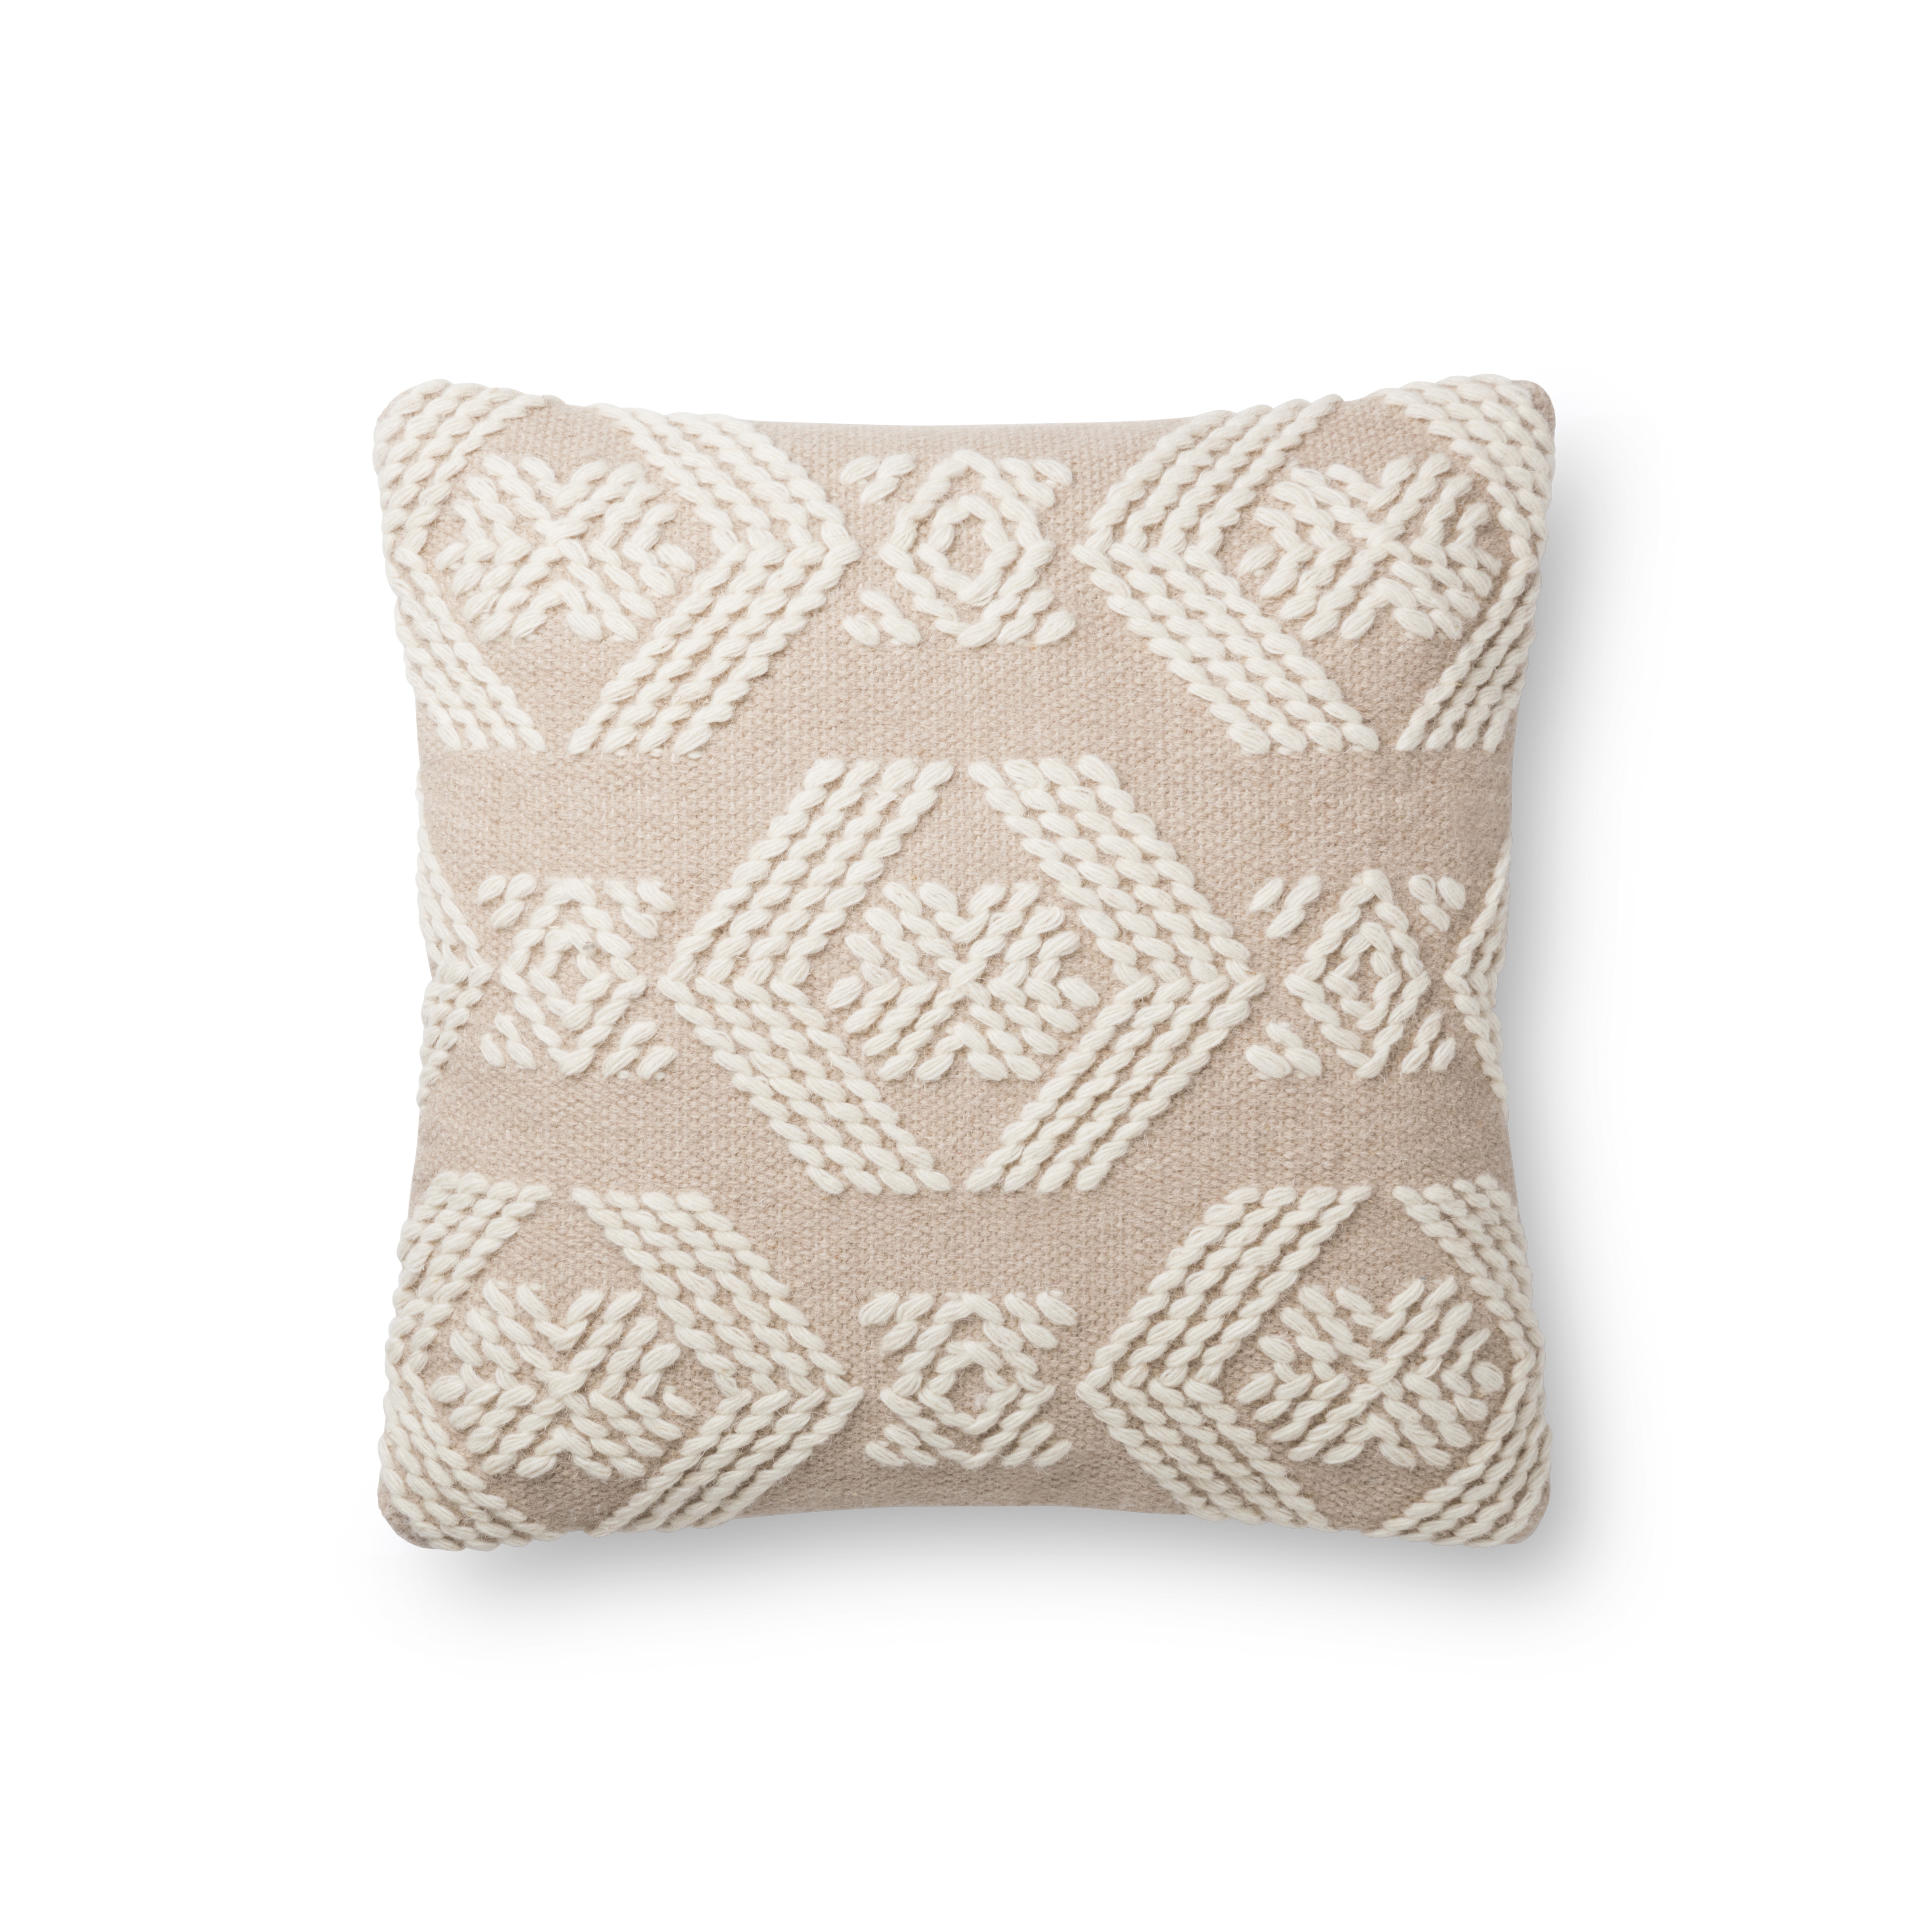 Magnolia Home by Joanna Gaines x Loloi Pillows P1105 Sand / Ivory 13" x 35" Cover Only - Image 0